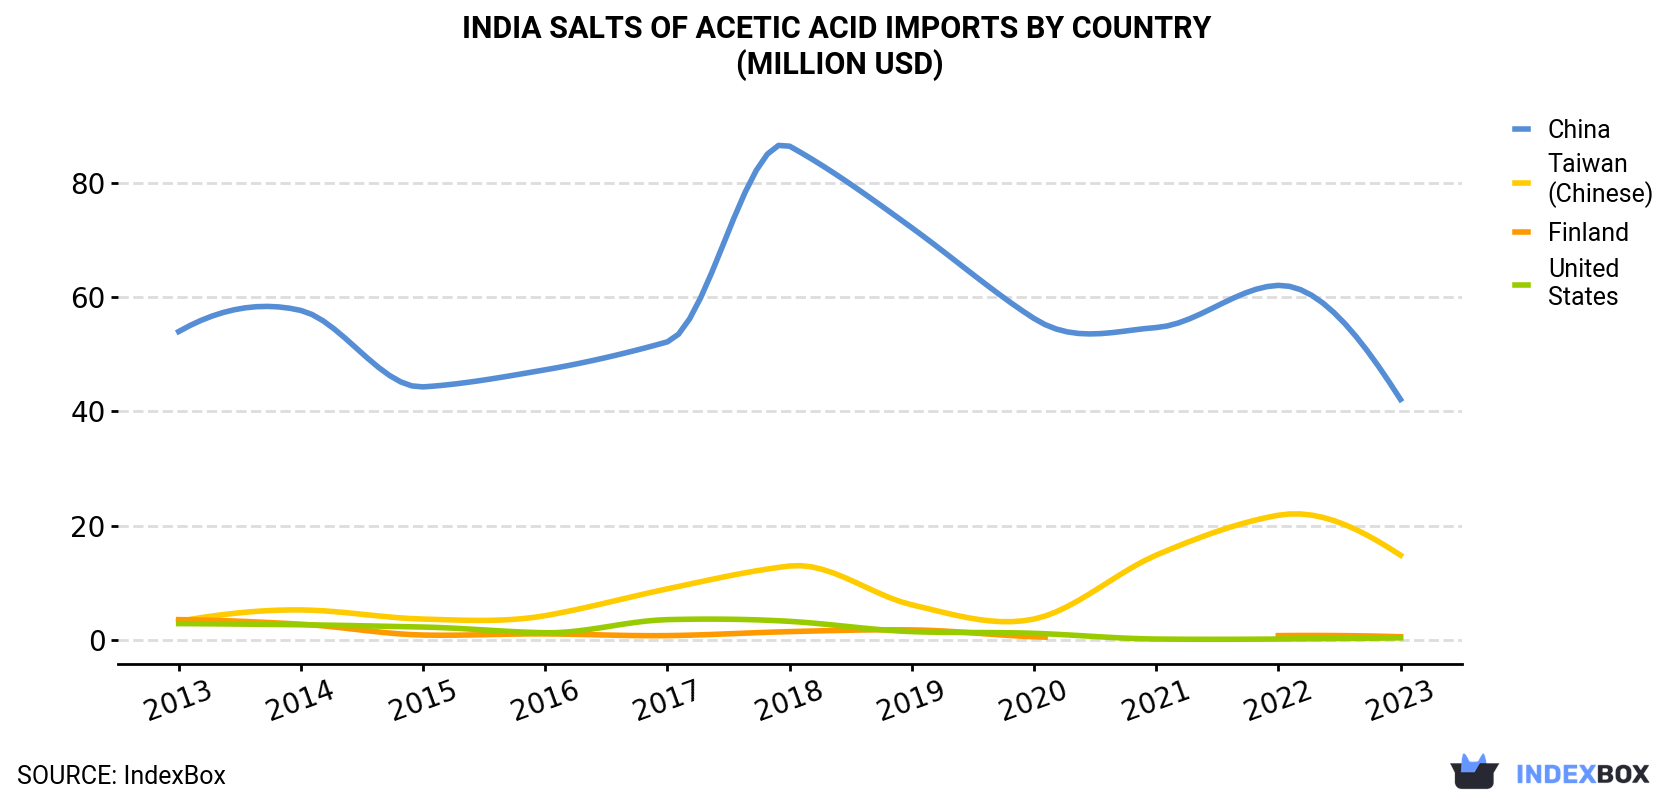 India Salts Of Acetic Acid Imports By Country (Million USD)